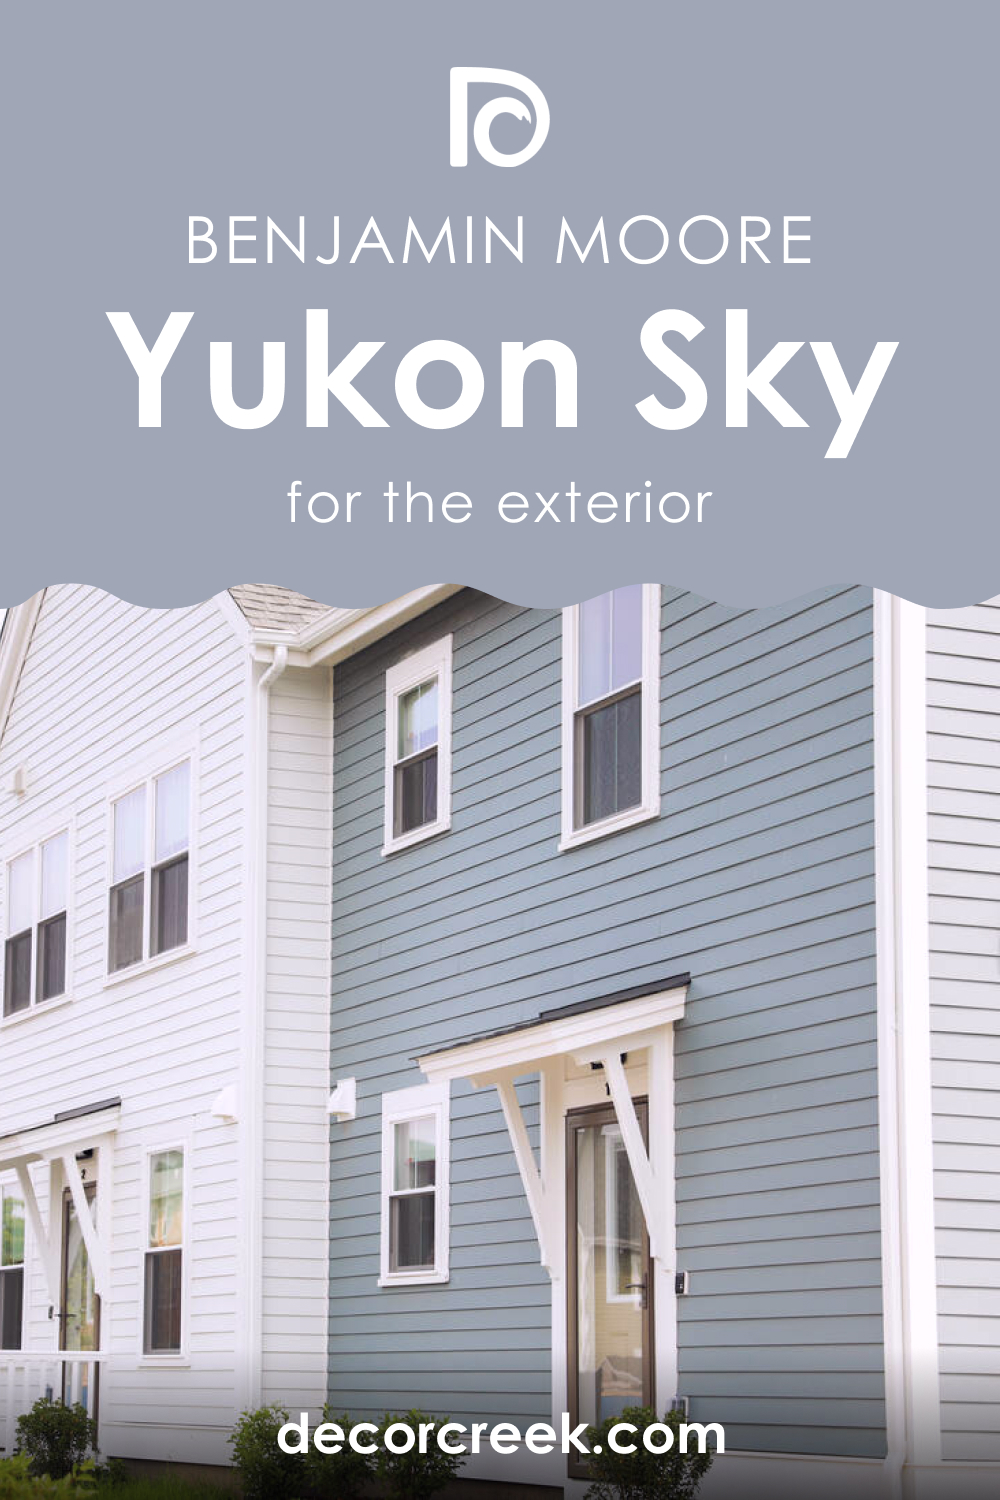 How to Use Yukon Sky 1439 for an Exterior?